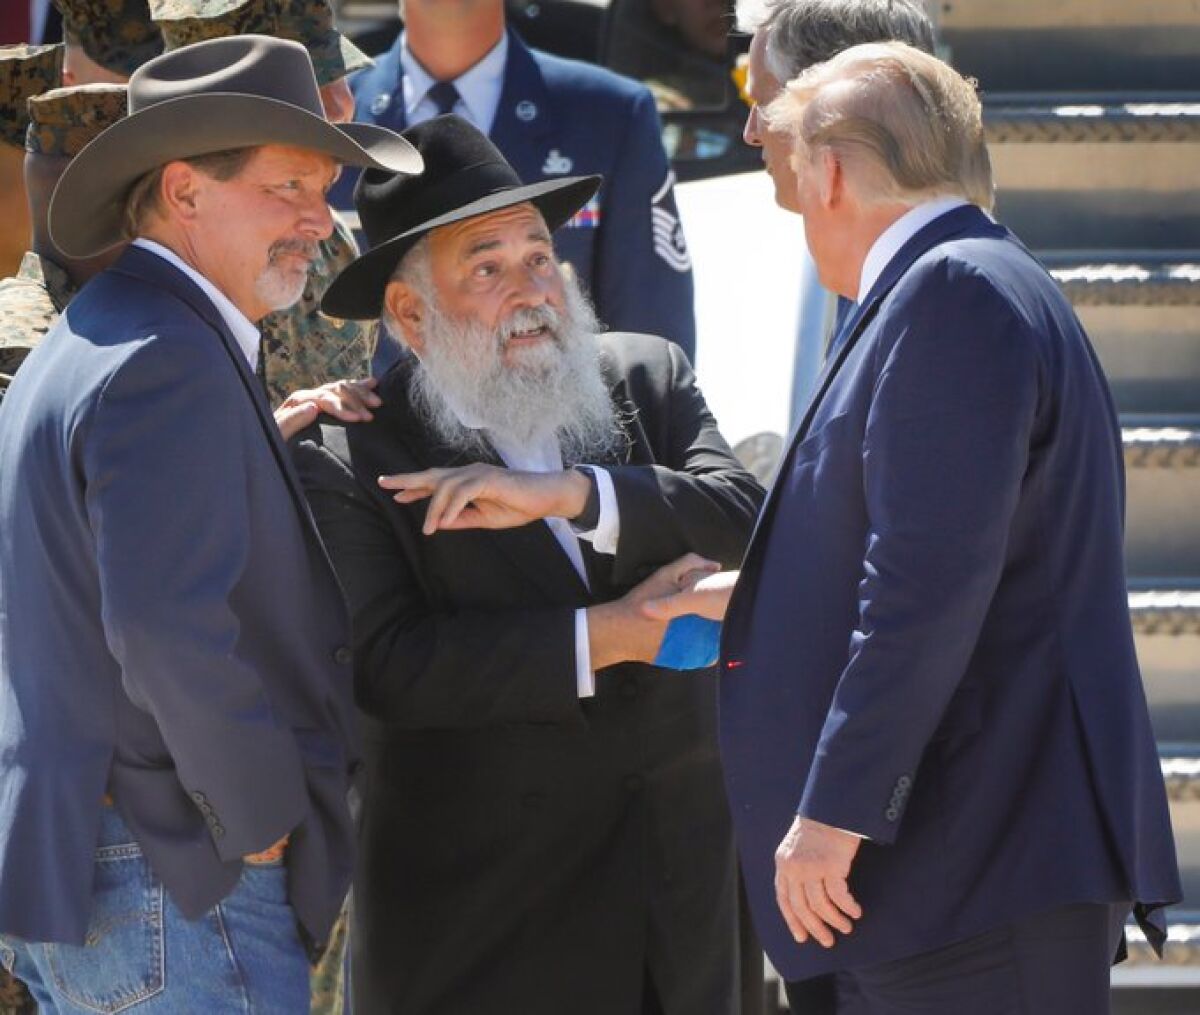 President Donald Trump is greeted by Poway Mayor Steve Vaus, and Rabbi Yisroel Goldstein, of Chabad of Poway, upon arriving MCAS Miramar for a San Diego visit. The rabbi was shot by a gunman who attacked the congregation in April.